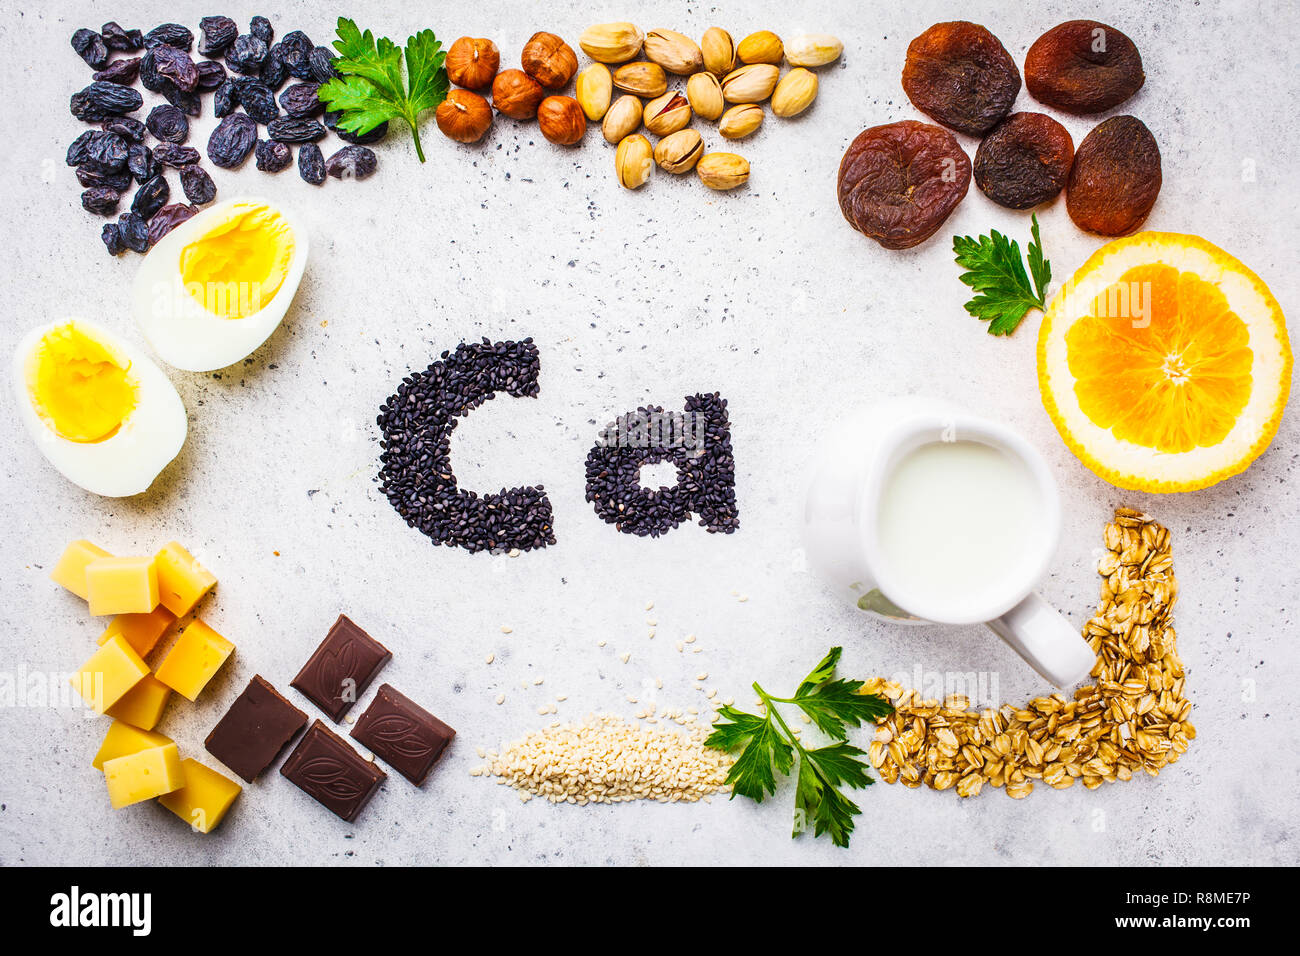 Healthy products sources of calcium. Top view, food background, Ca ingredients: cereals, dried fruits, dairy products, orange, nuts, greens and cheese Stock Photo